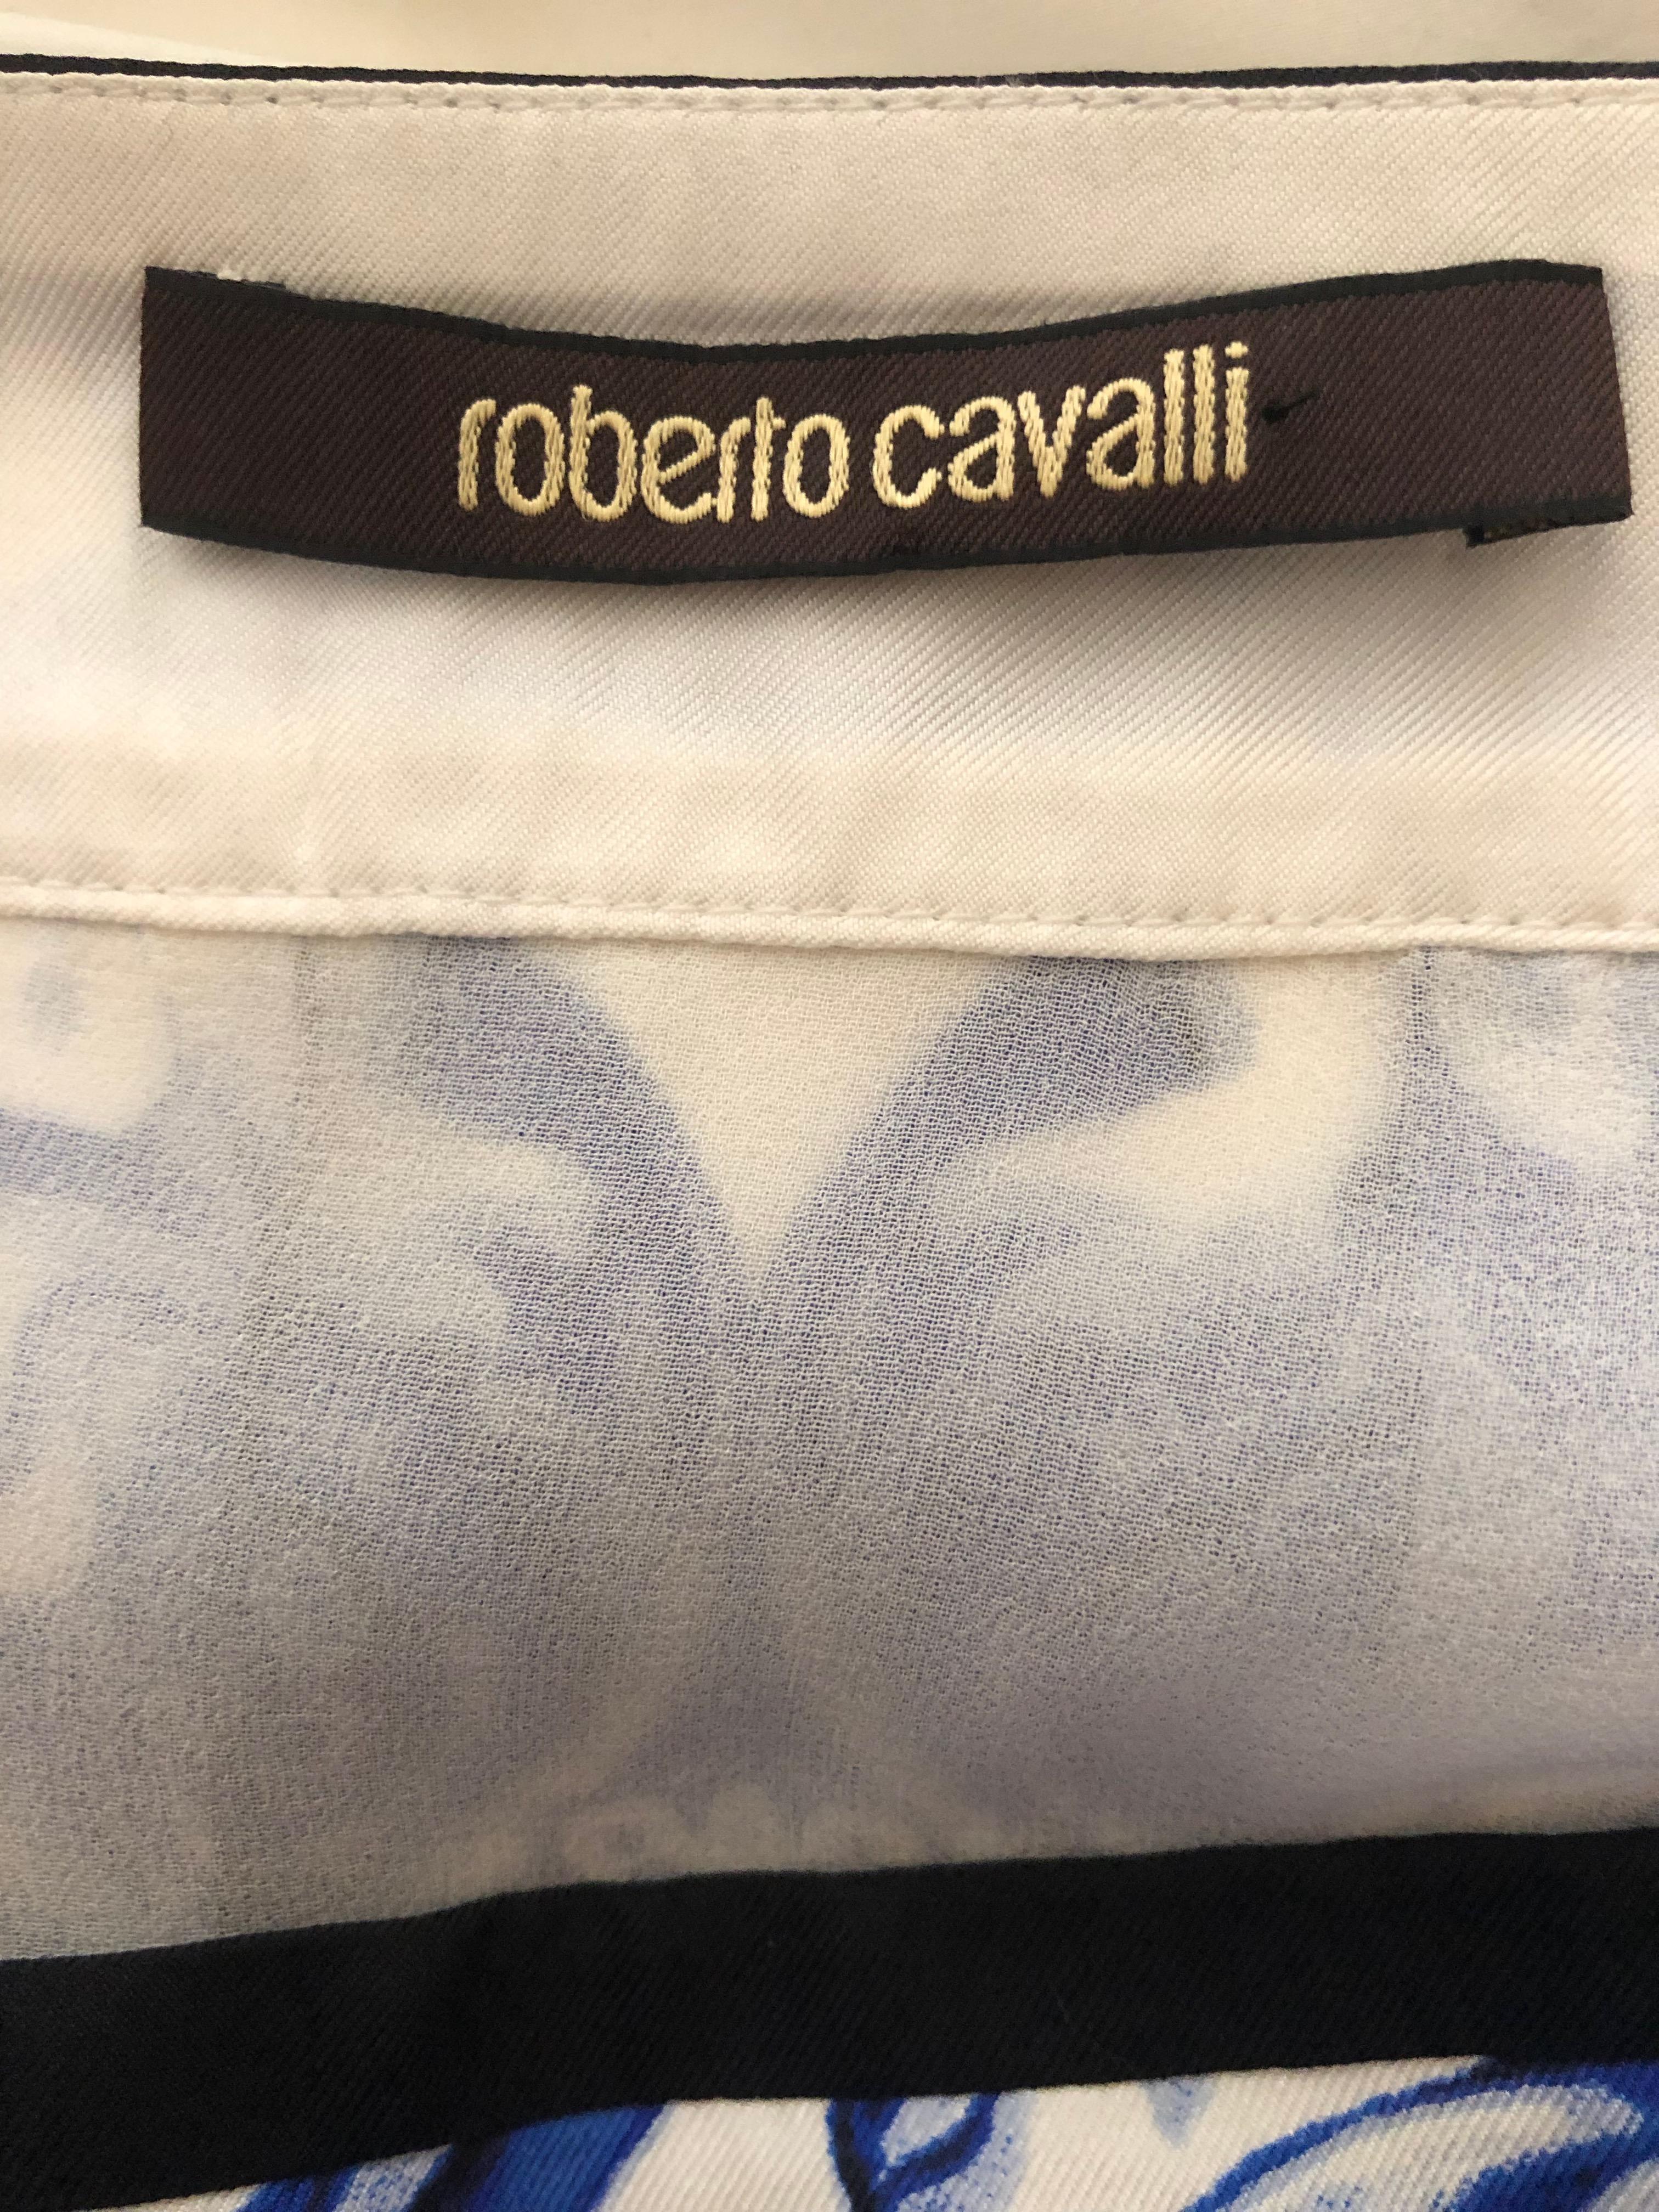 Roberto Cavalli Blue and White Delft China Trade Pattern Silk Pleated Skirt 42
This is so pretty
Size 42
Waist 30